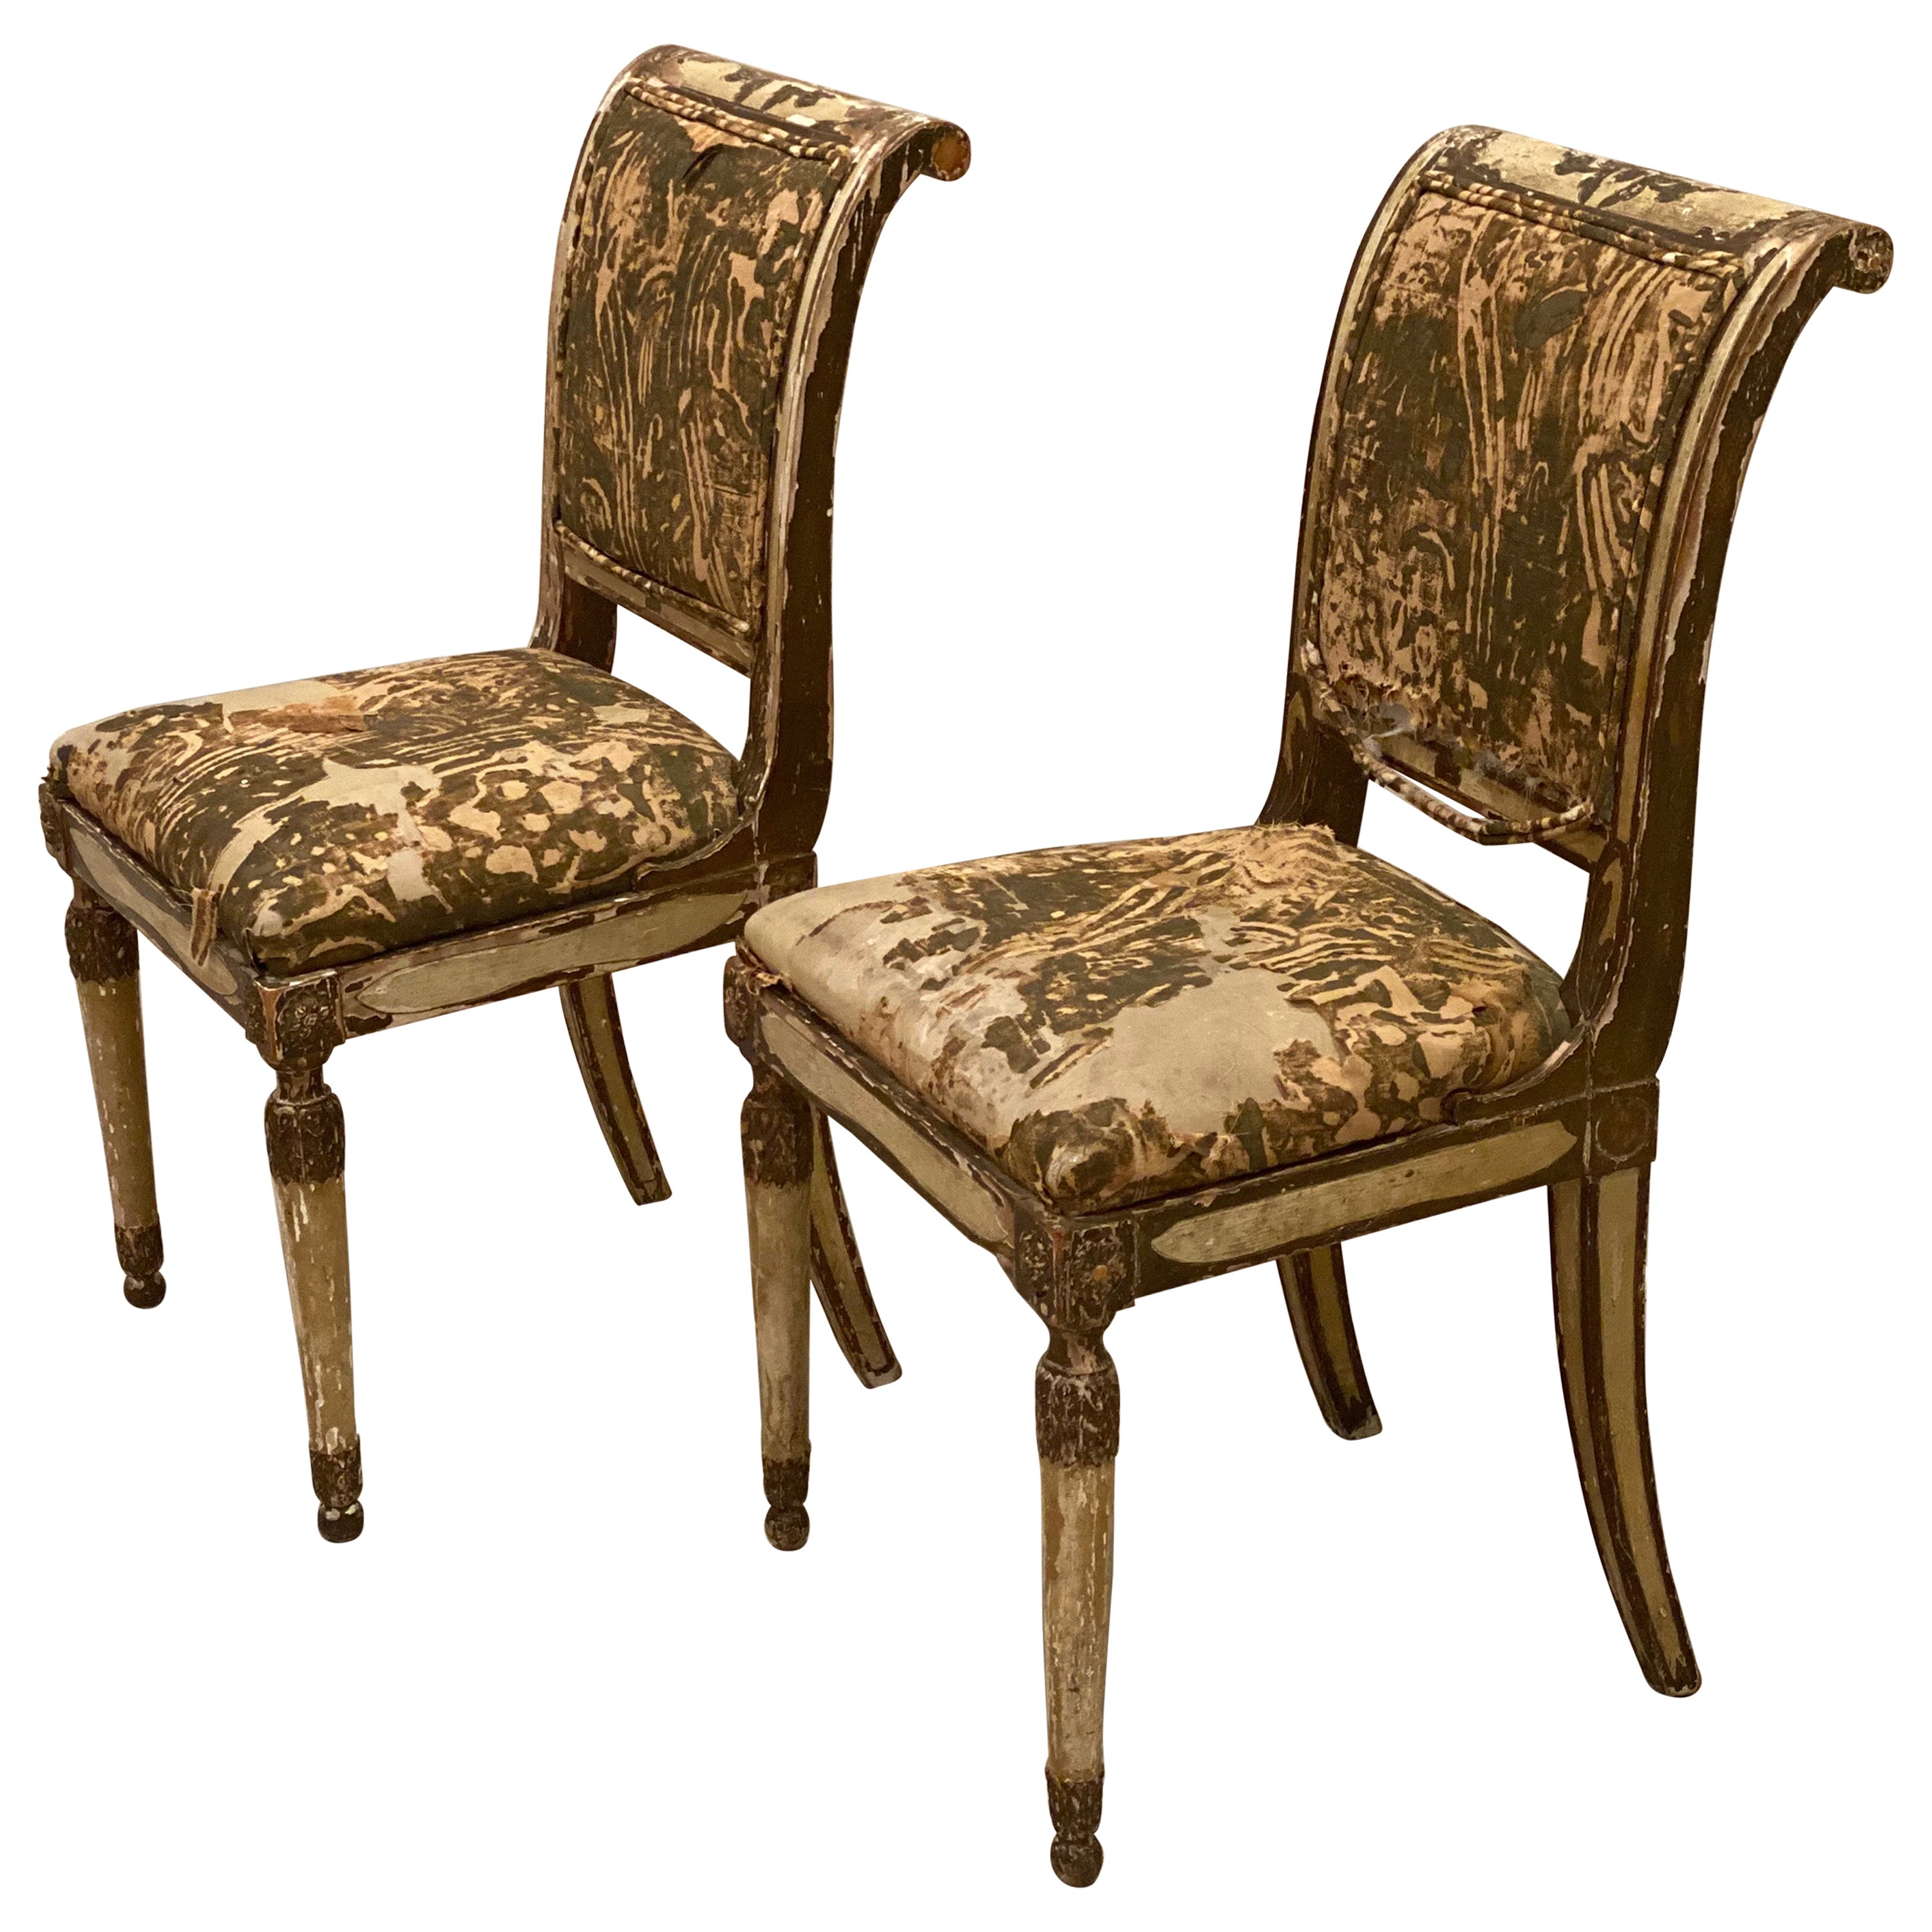 Pair of Italian Neoclassical Style Painted & Gilt Side Chairs, 19th Century